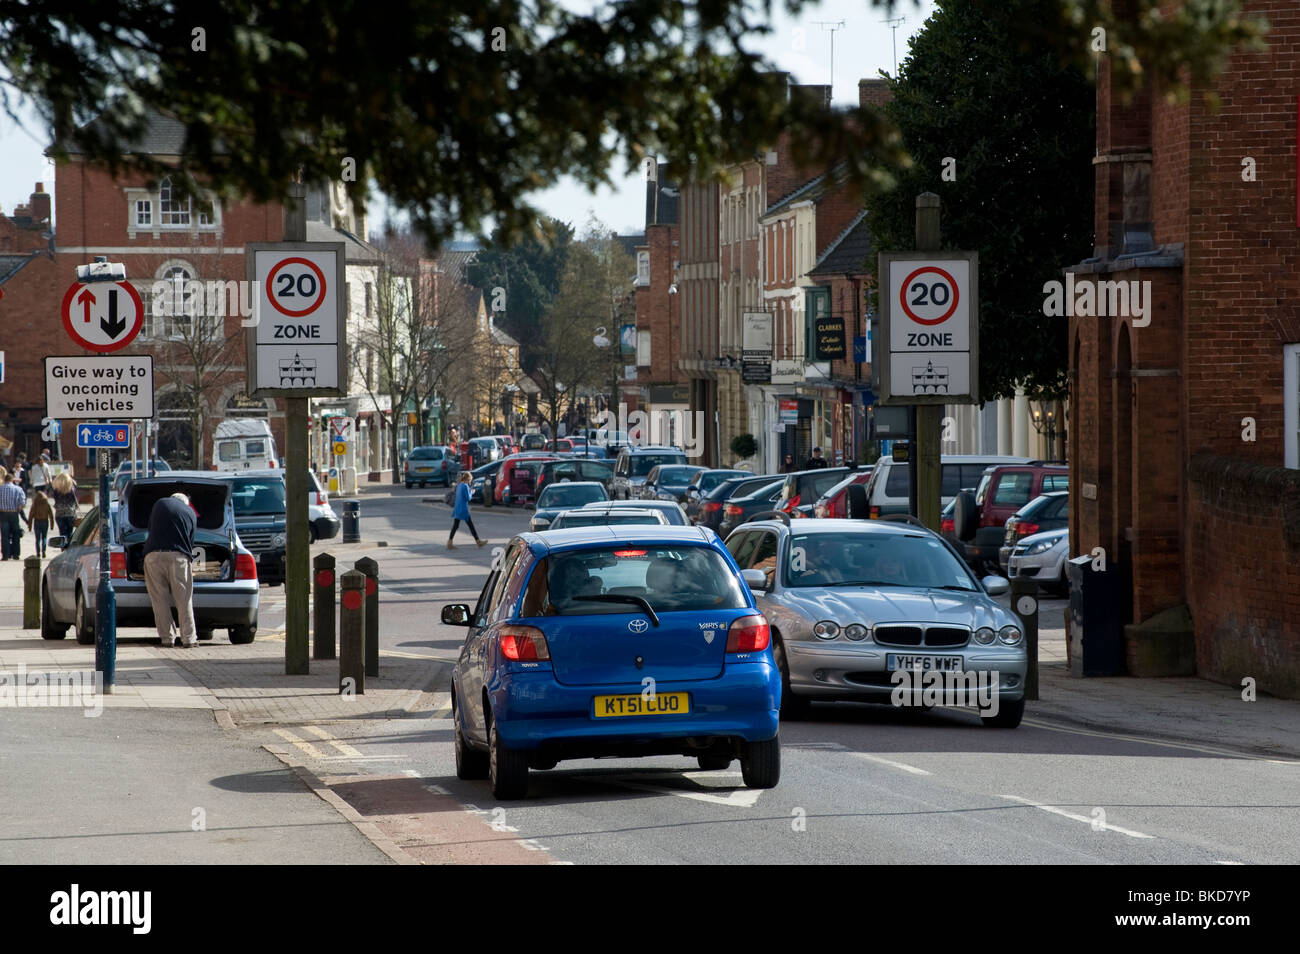 Traffic entering a 20 mph zone in the small market town of Market Harborough, Leicestershire, England. Stock Photo